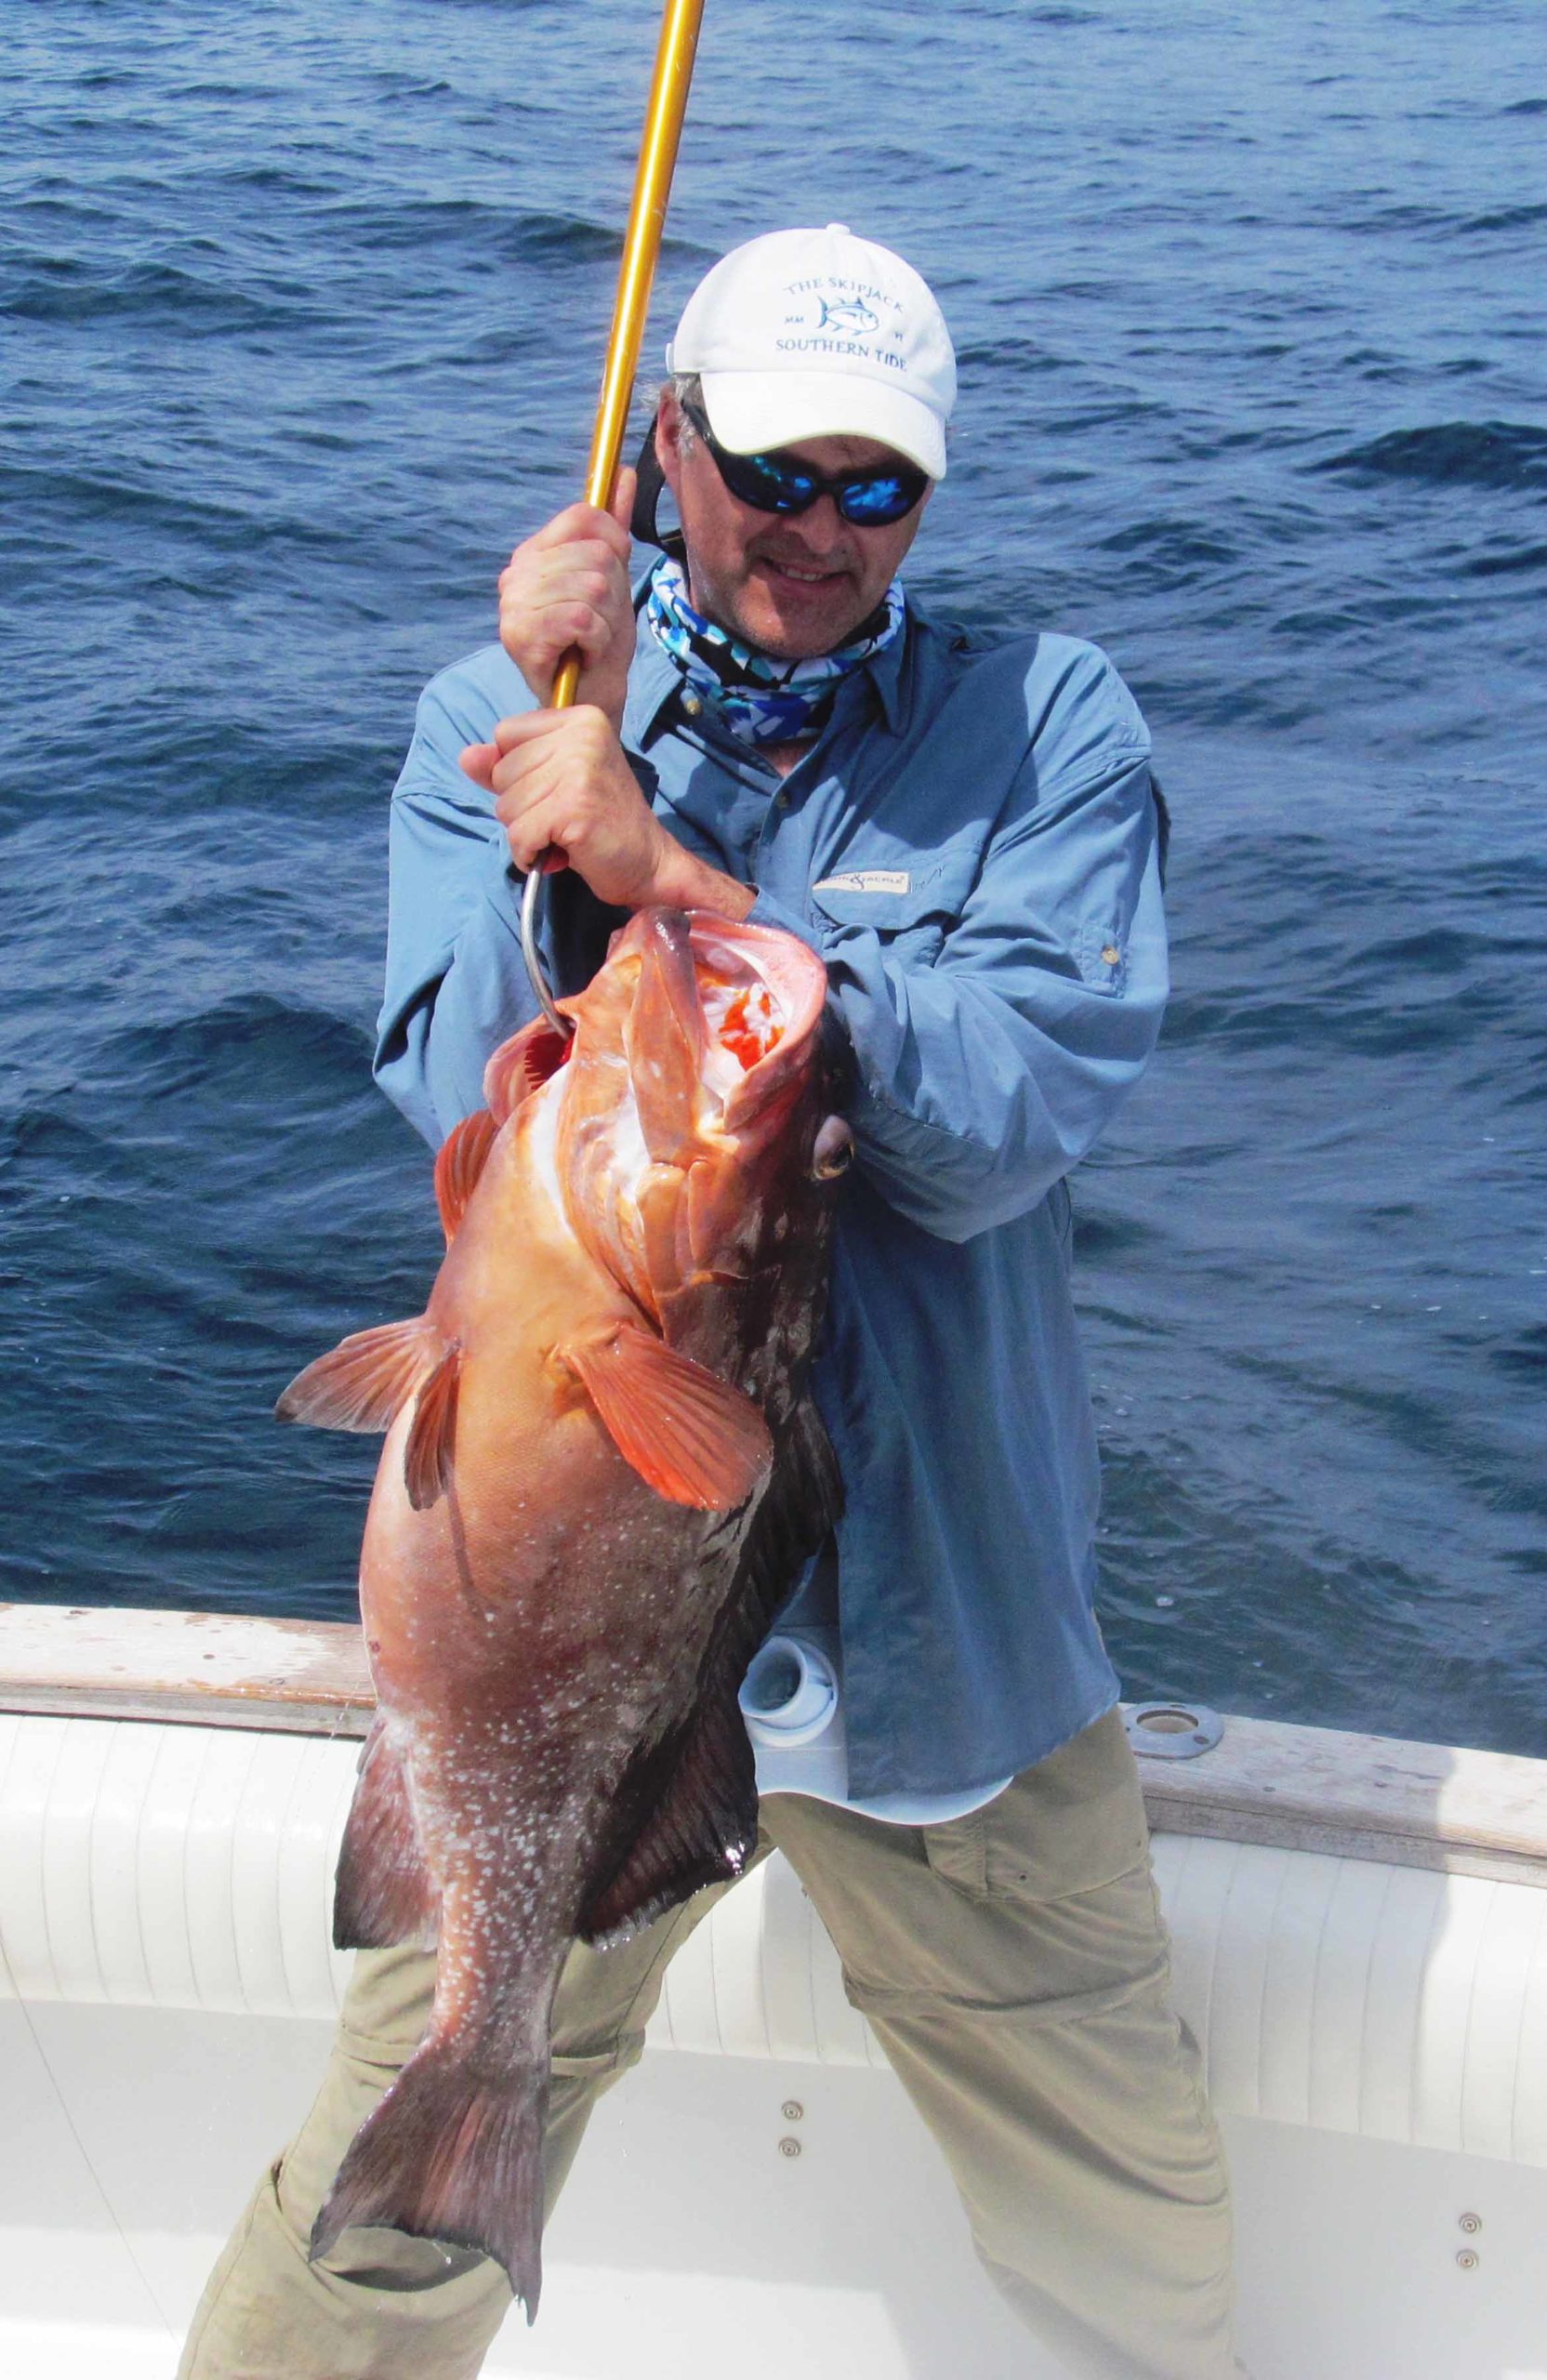 Try offshore bottom-fishing out of Southport in September